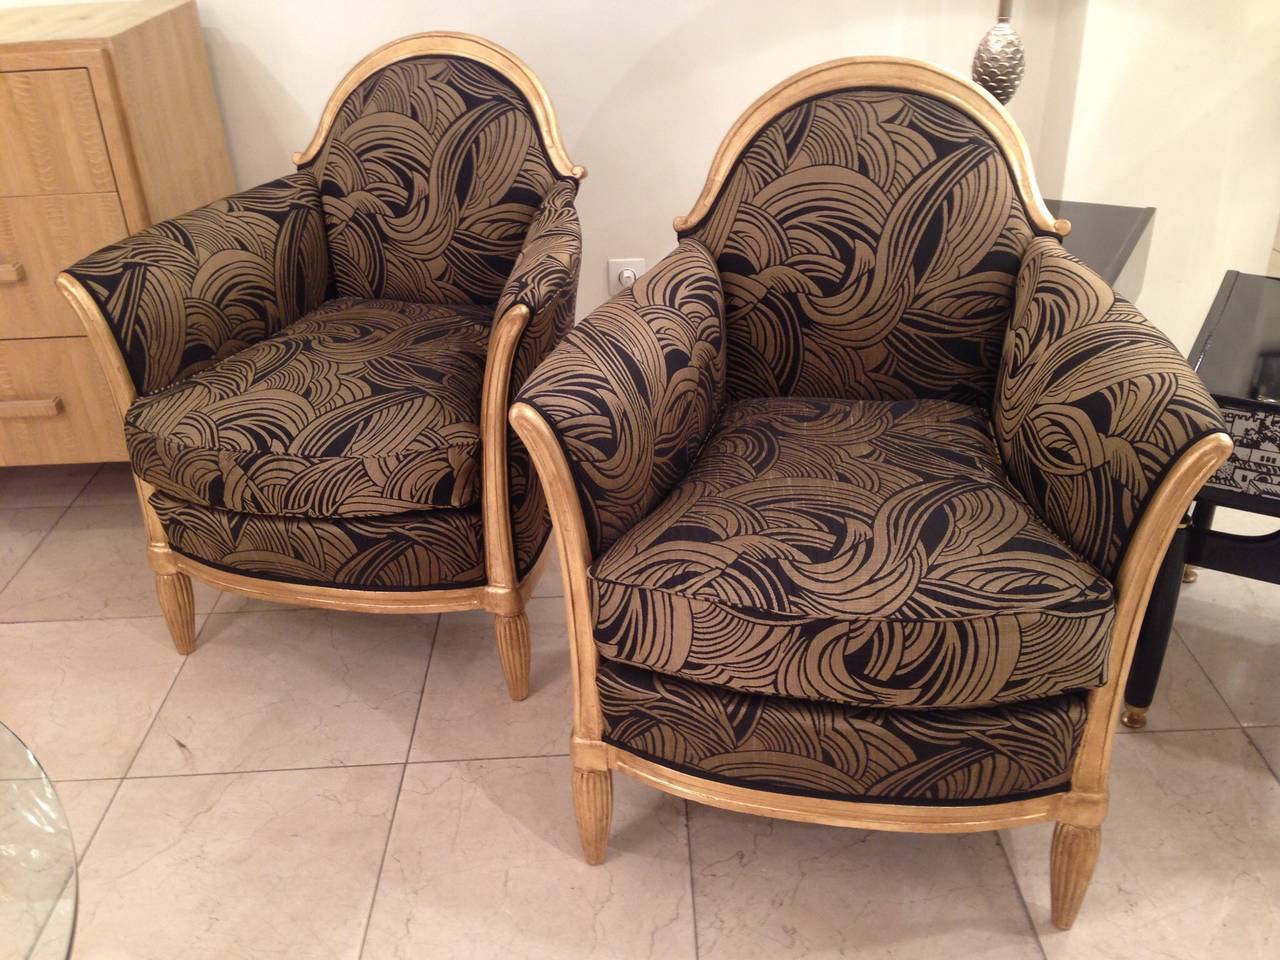 Pair of Art Deco armchairs, gold leaf wood, covered with a new fabric black and gold.
Attributed to Paul Follot.